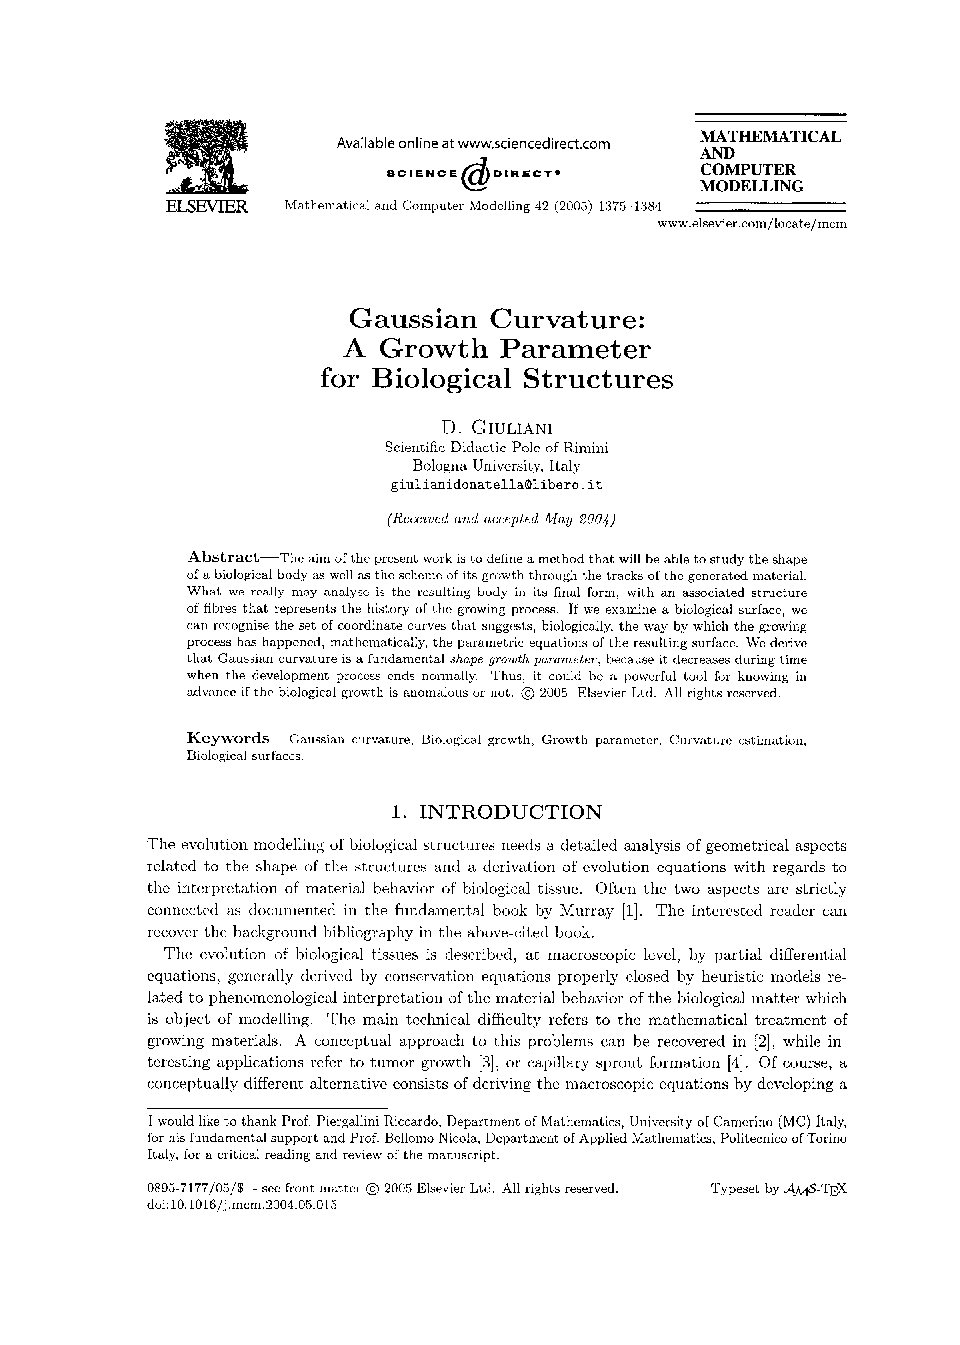 Gaussian curvature: A growth parameter for biological structures